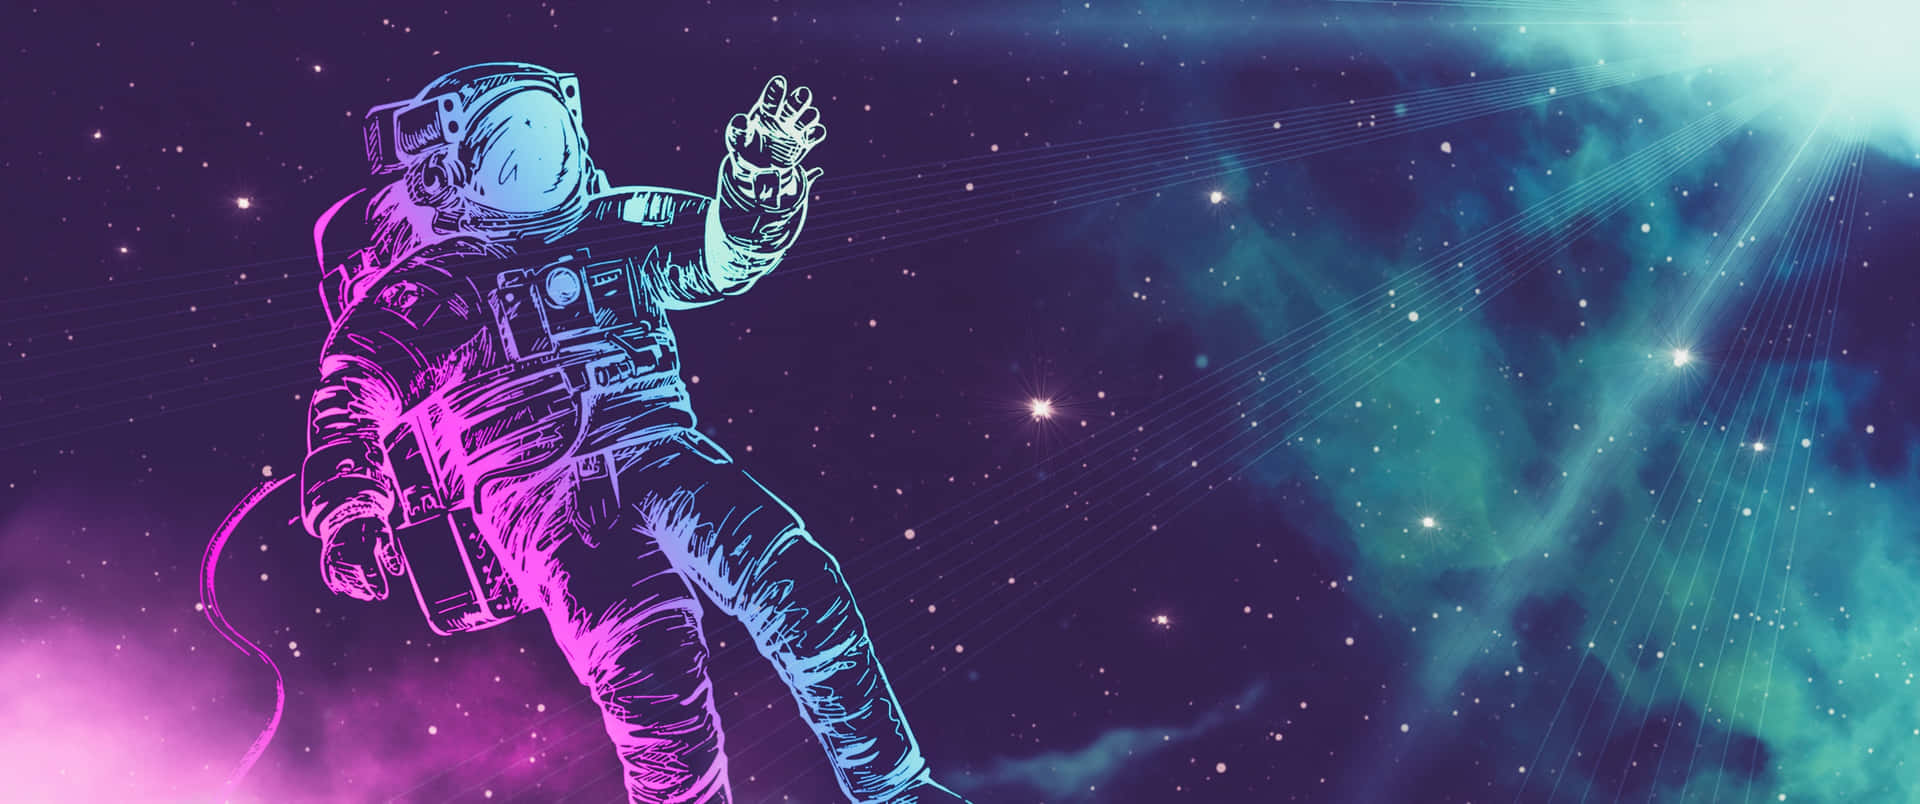 Explore the beauty of space with this mesmerizing astronaut aesthetic